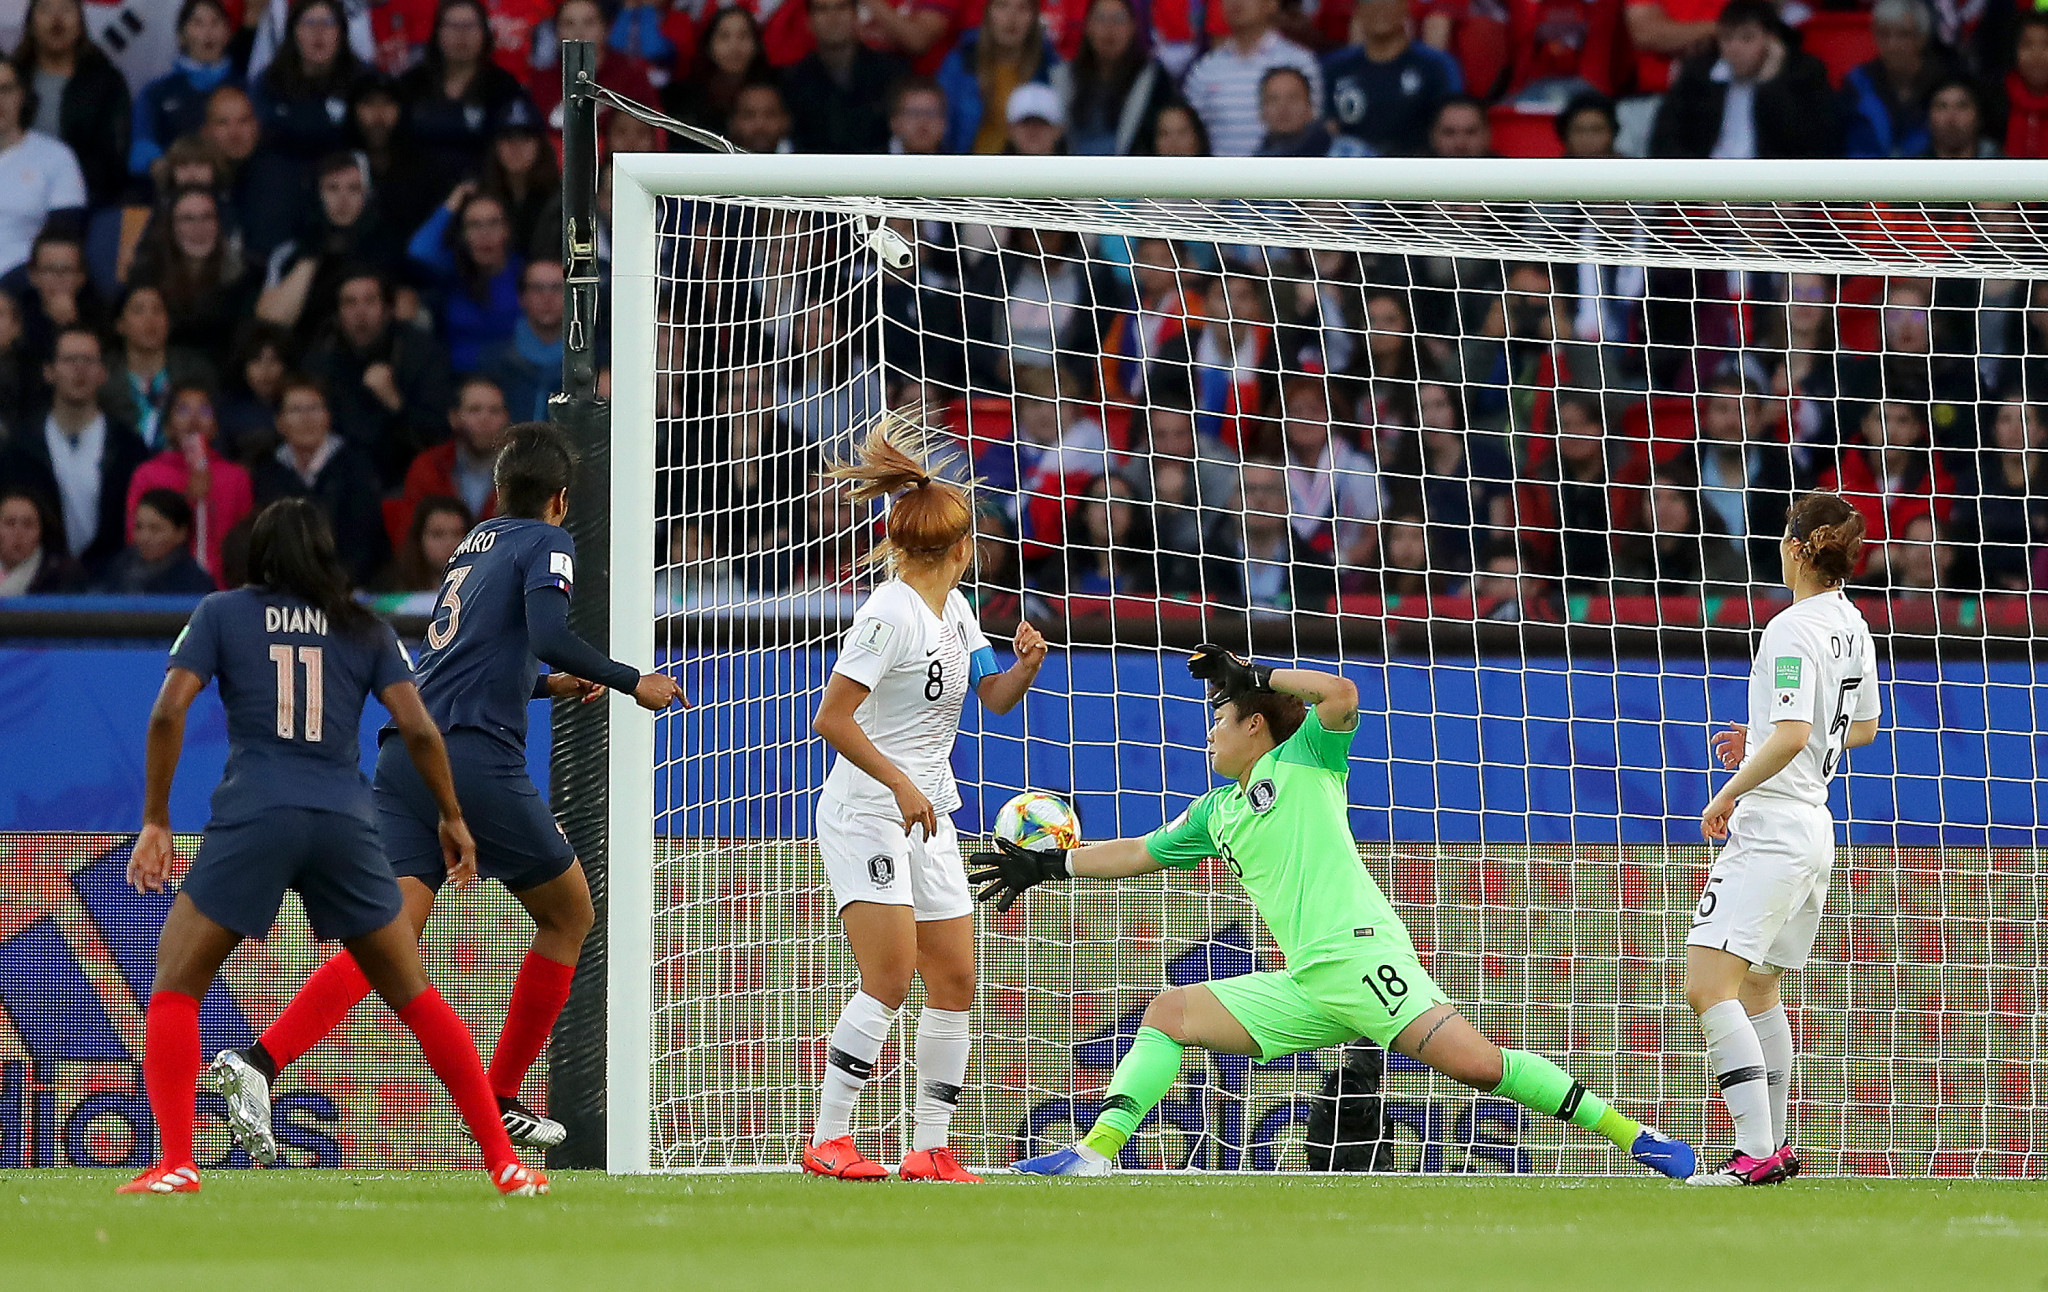 Renard heads home twice in French demolition of South Korea at 2019 FIFA Women's World Cup